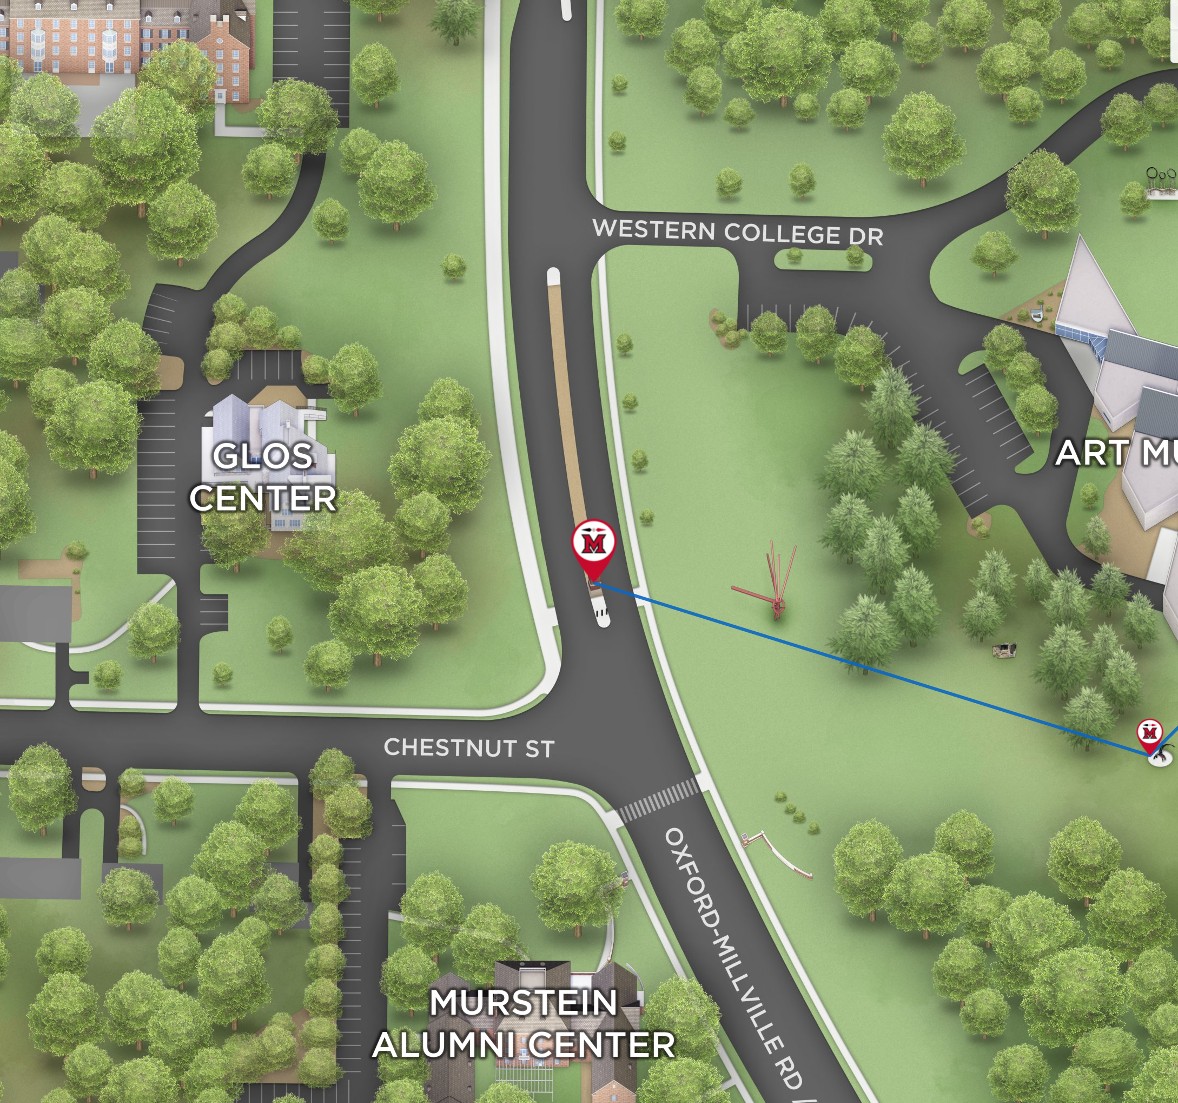 View of the campus map focusing on the Miami University Art Museum entrance, the beginning location of the 